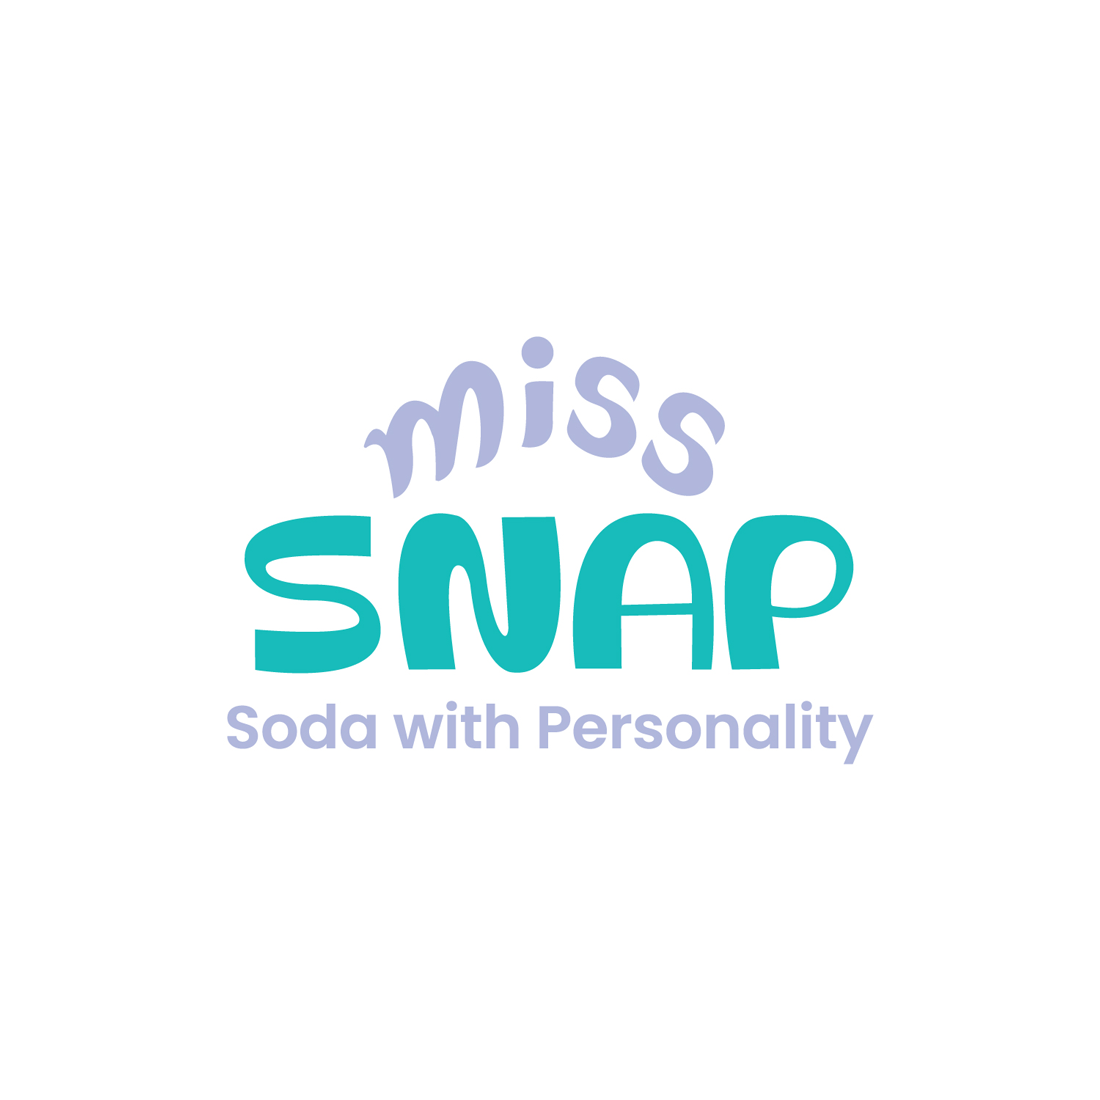 Miss Snap Brand Identity and Packaging - Image 2